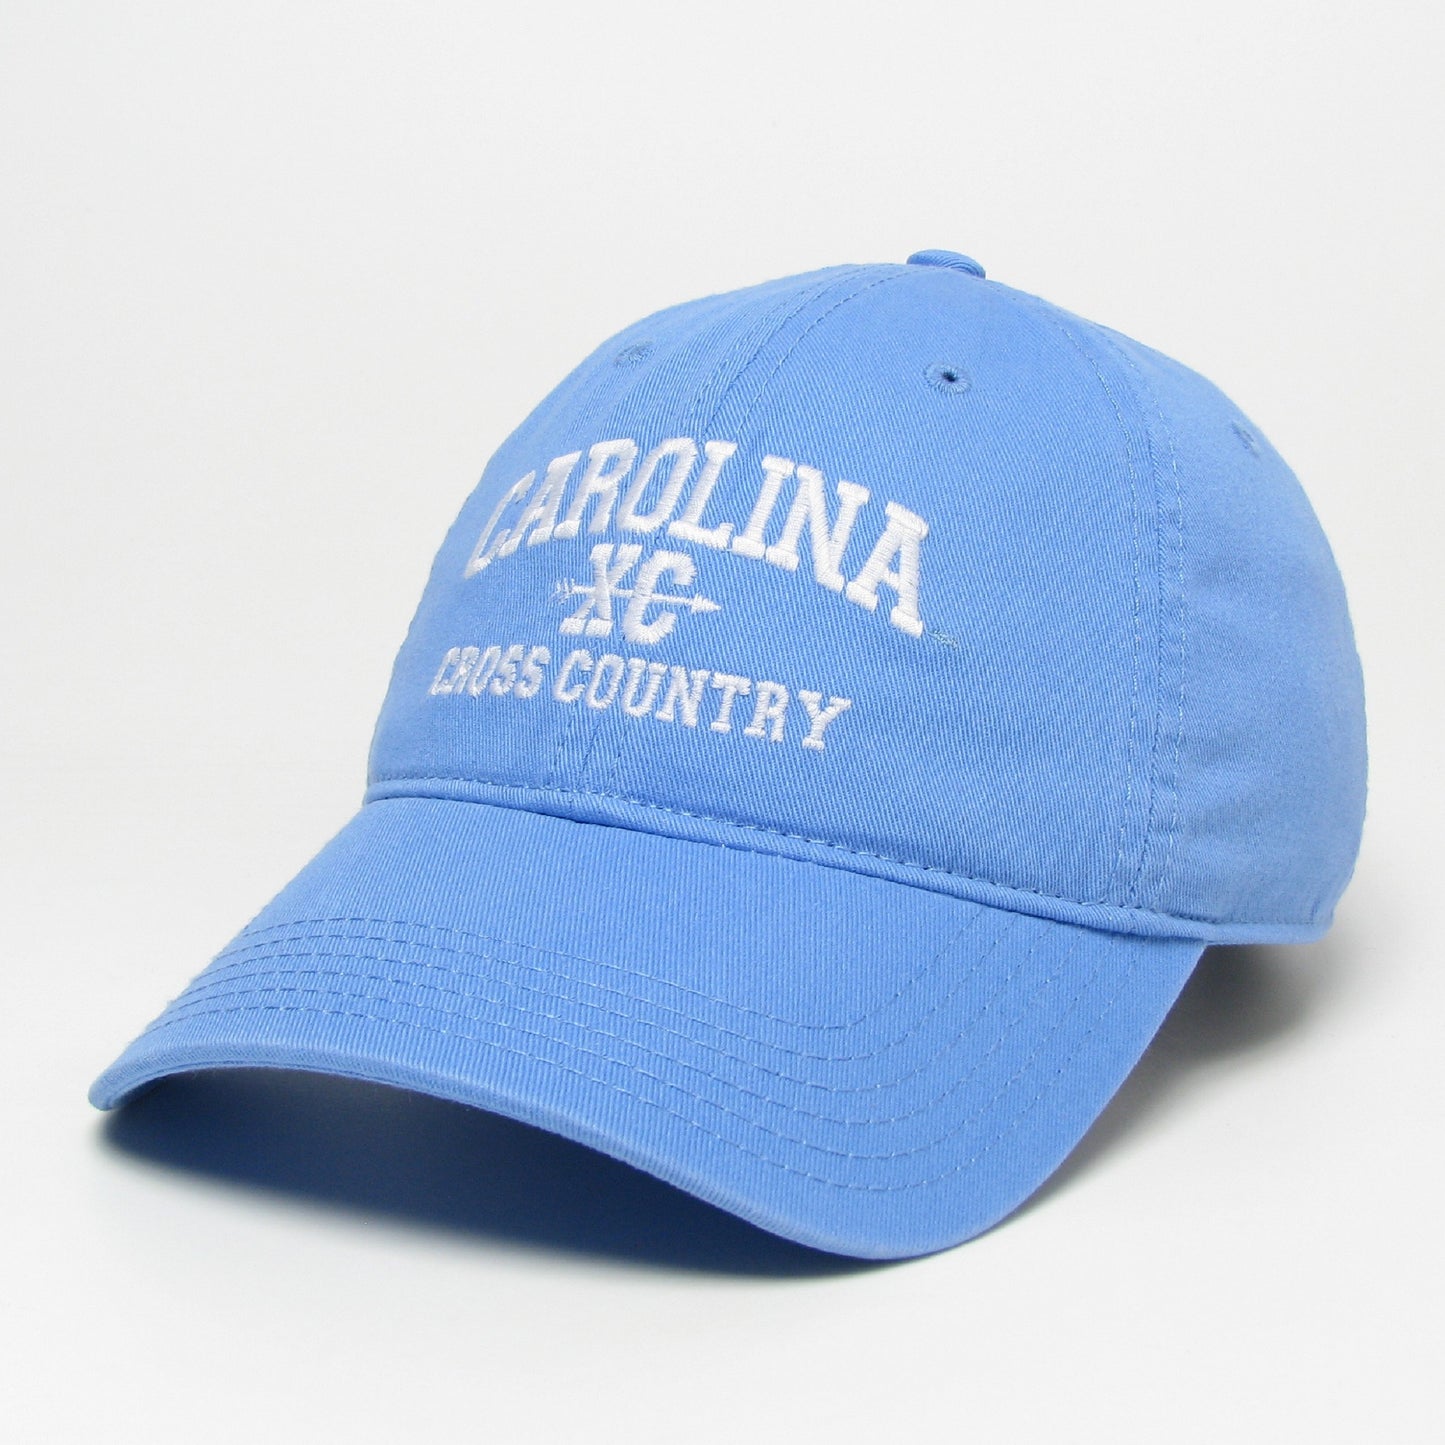 Carolina Cross Country Hat by Legacy - UNC Sport Hat